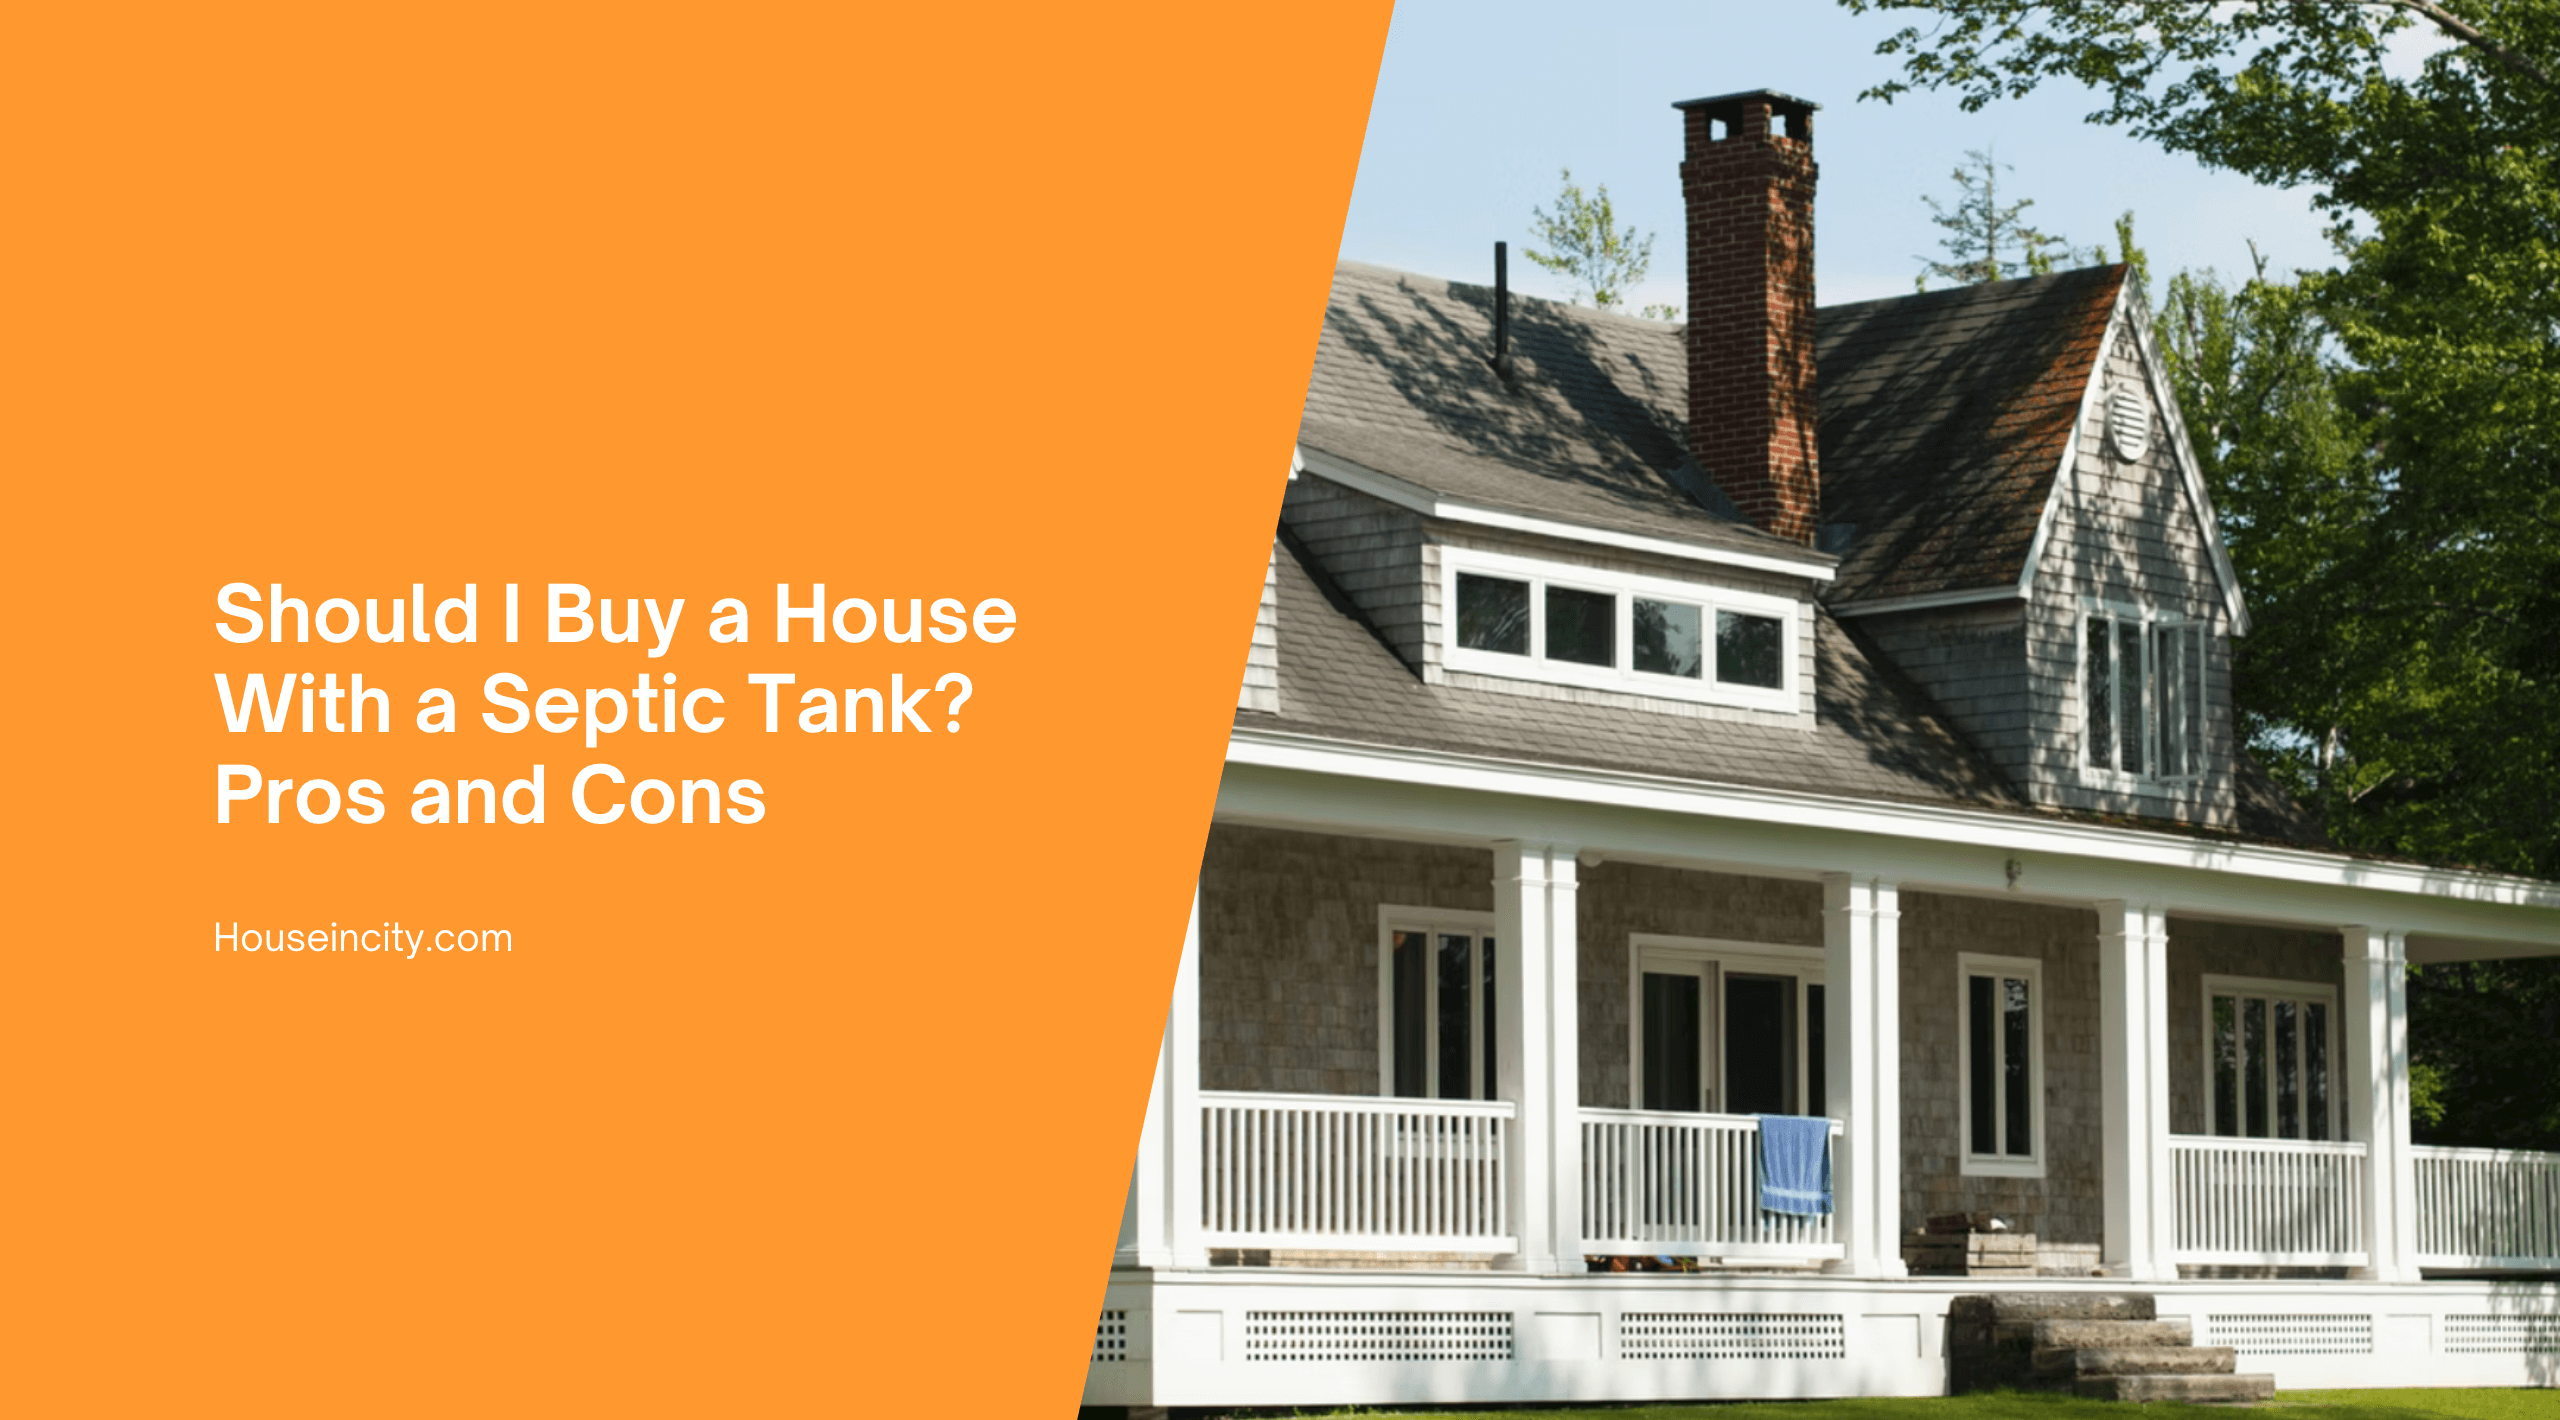 Should I Buy a House With a Septic Tank? Pros and Cons